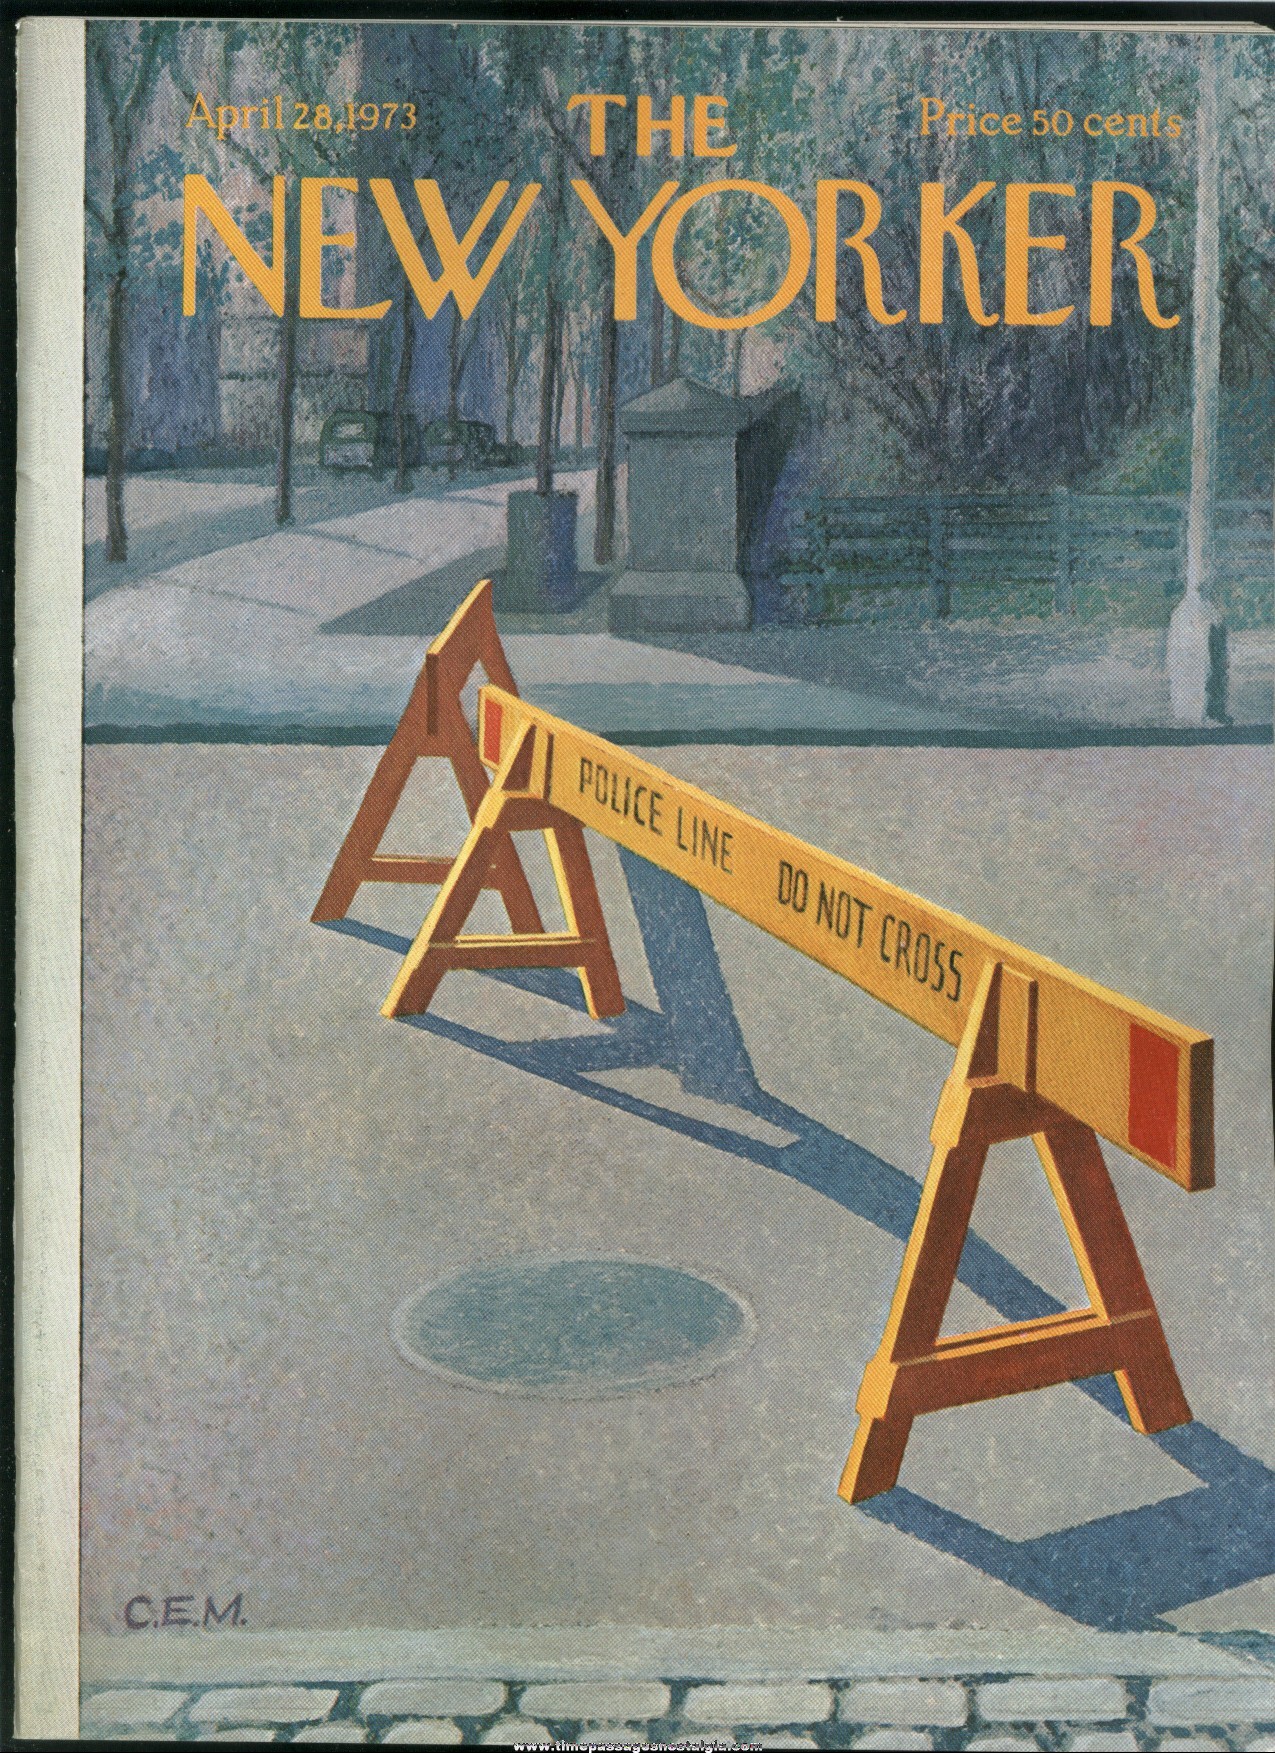 New Yorker Magazine - April 28, 1973 - Cover by Charles E. Martin